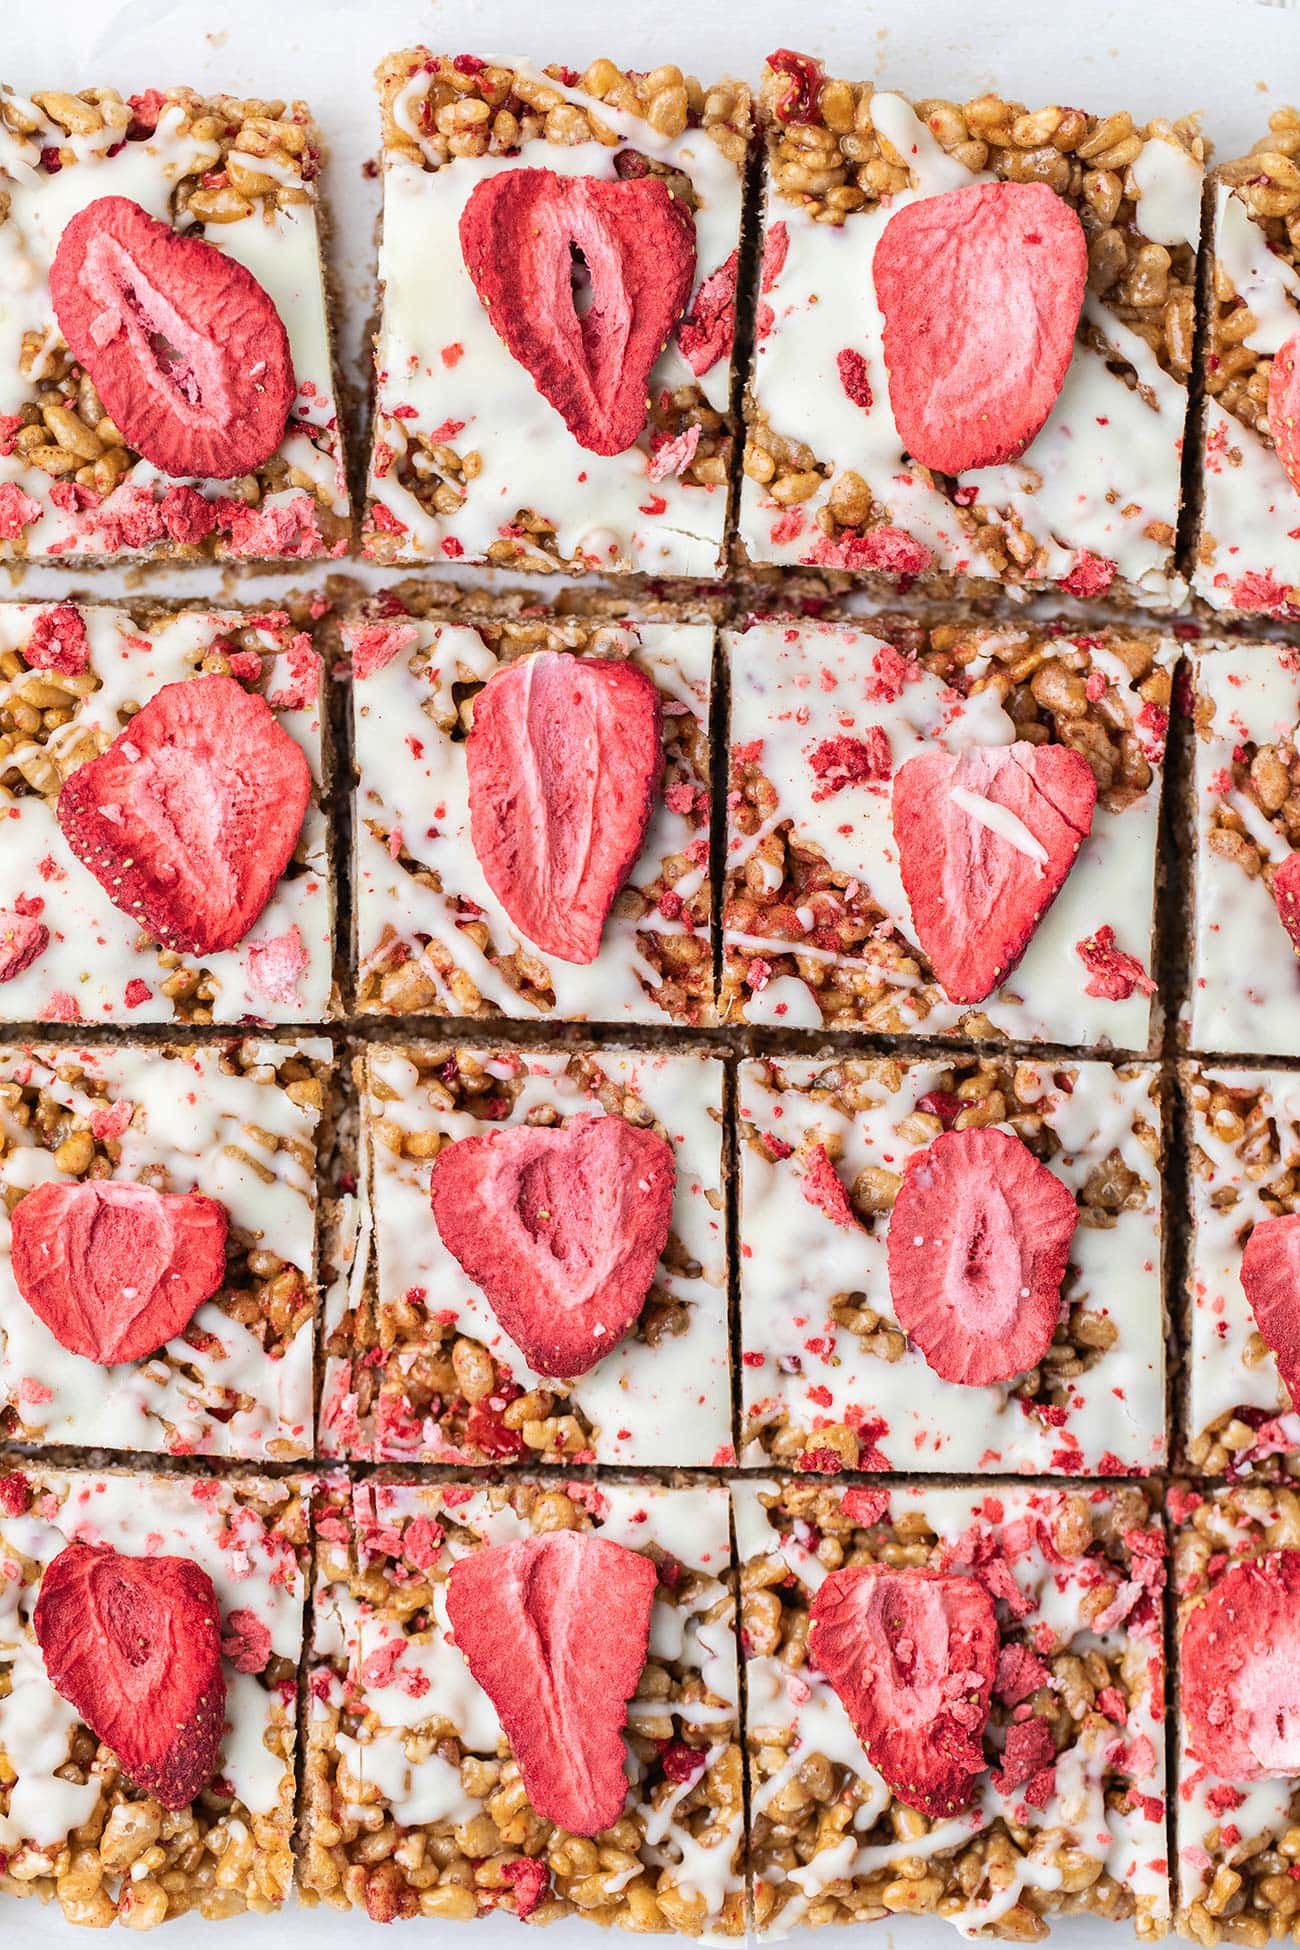 A batch of strawberry rice krispies treats cut into squares and topped with white chocolate and dried strawberries.